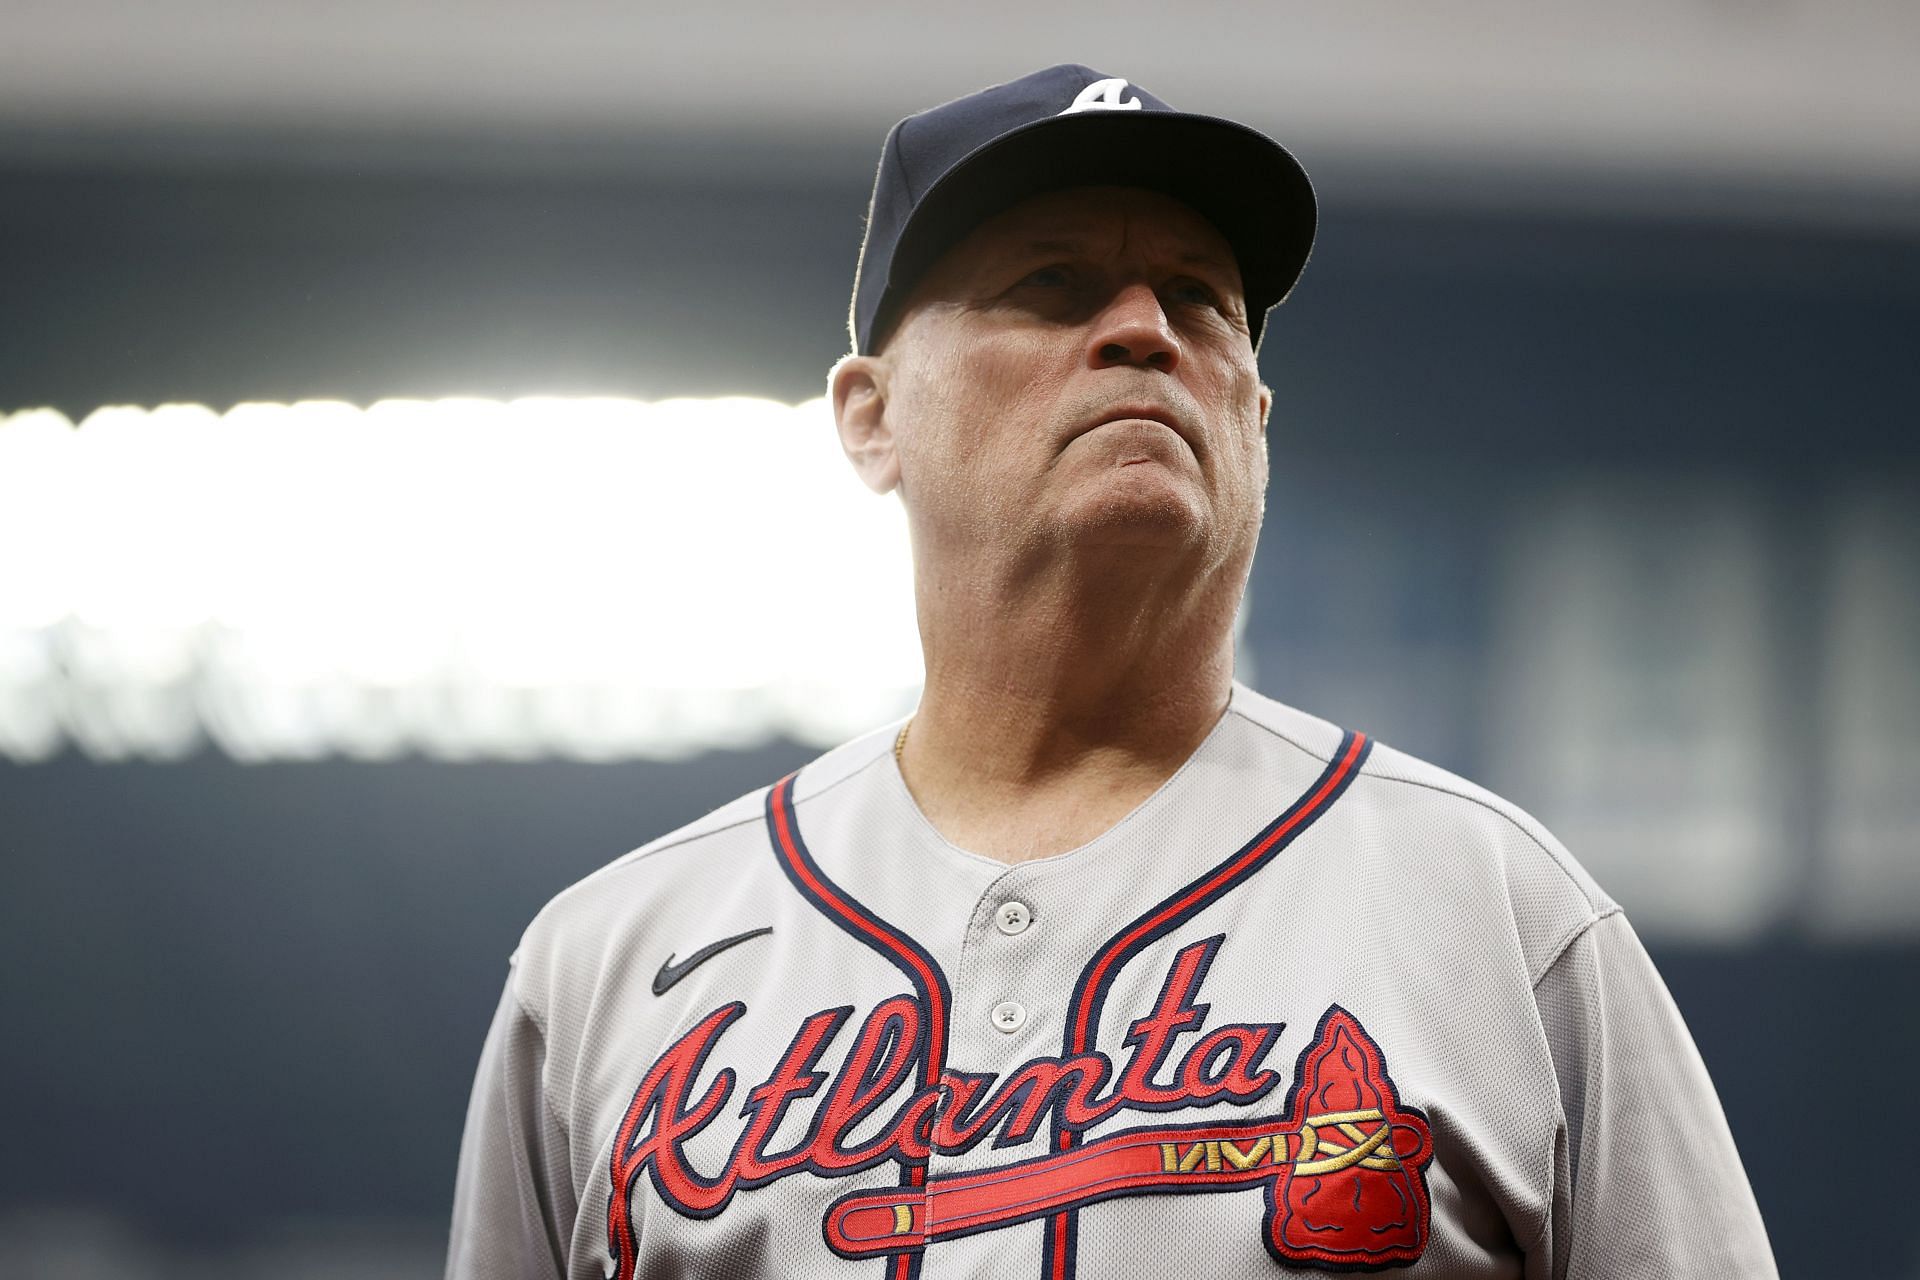 Brian Snitker: "I am honored to keep going with the Atlanta Braves"